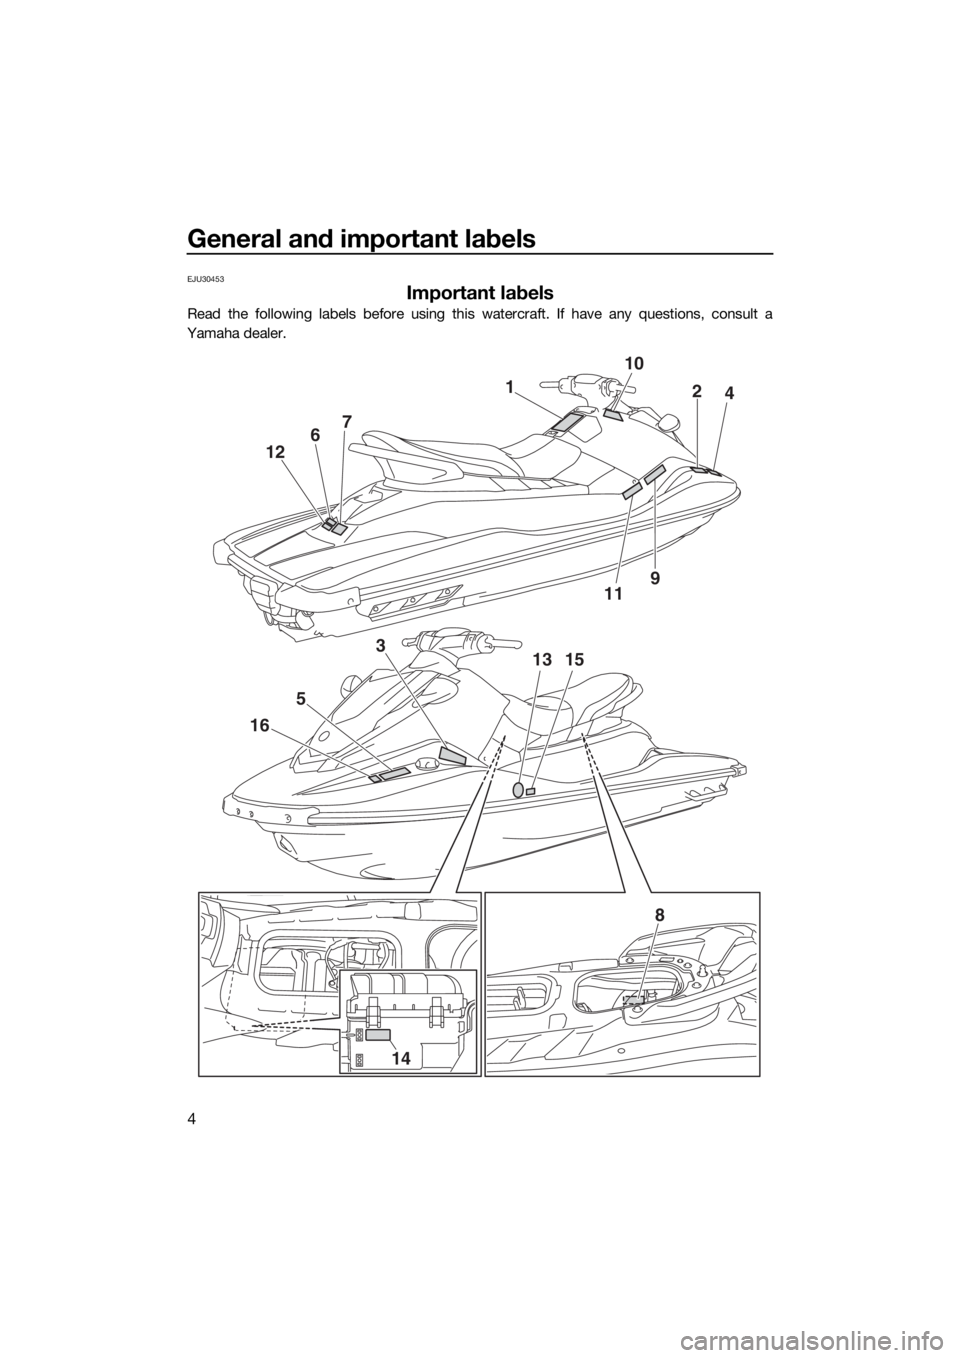 YAMAHA EX DELUXE 2018  Owners Manual General and important labels
4
EJU30453
Important labels
Read the following labels before using this watercraft. If have any questions, consult a
Yamaha dealer.
110
2
4
119 12
5
163
13
15 7
6
14
8
UF3